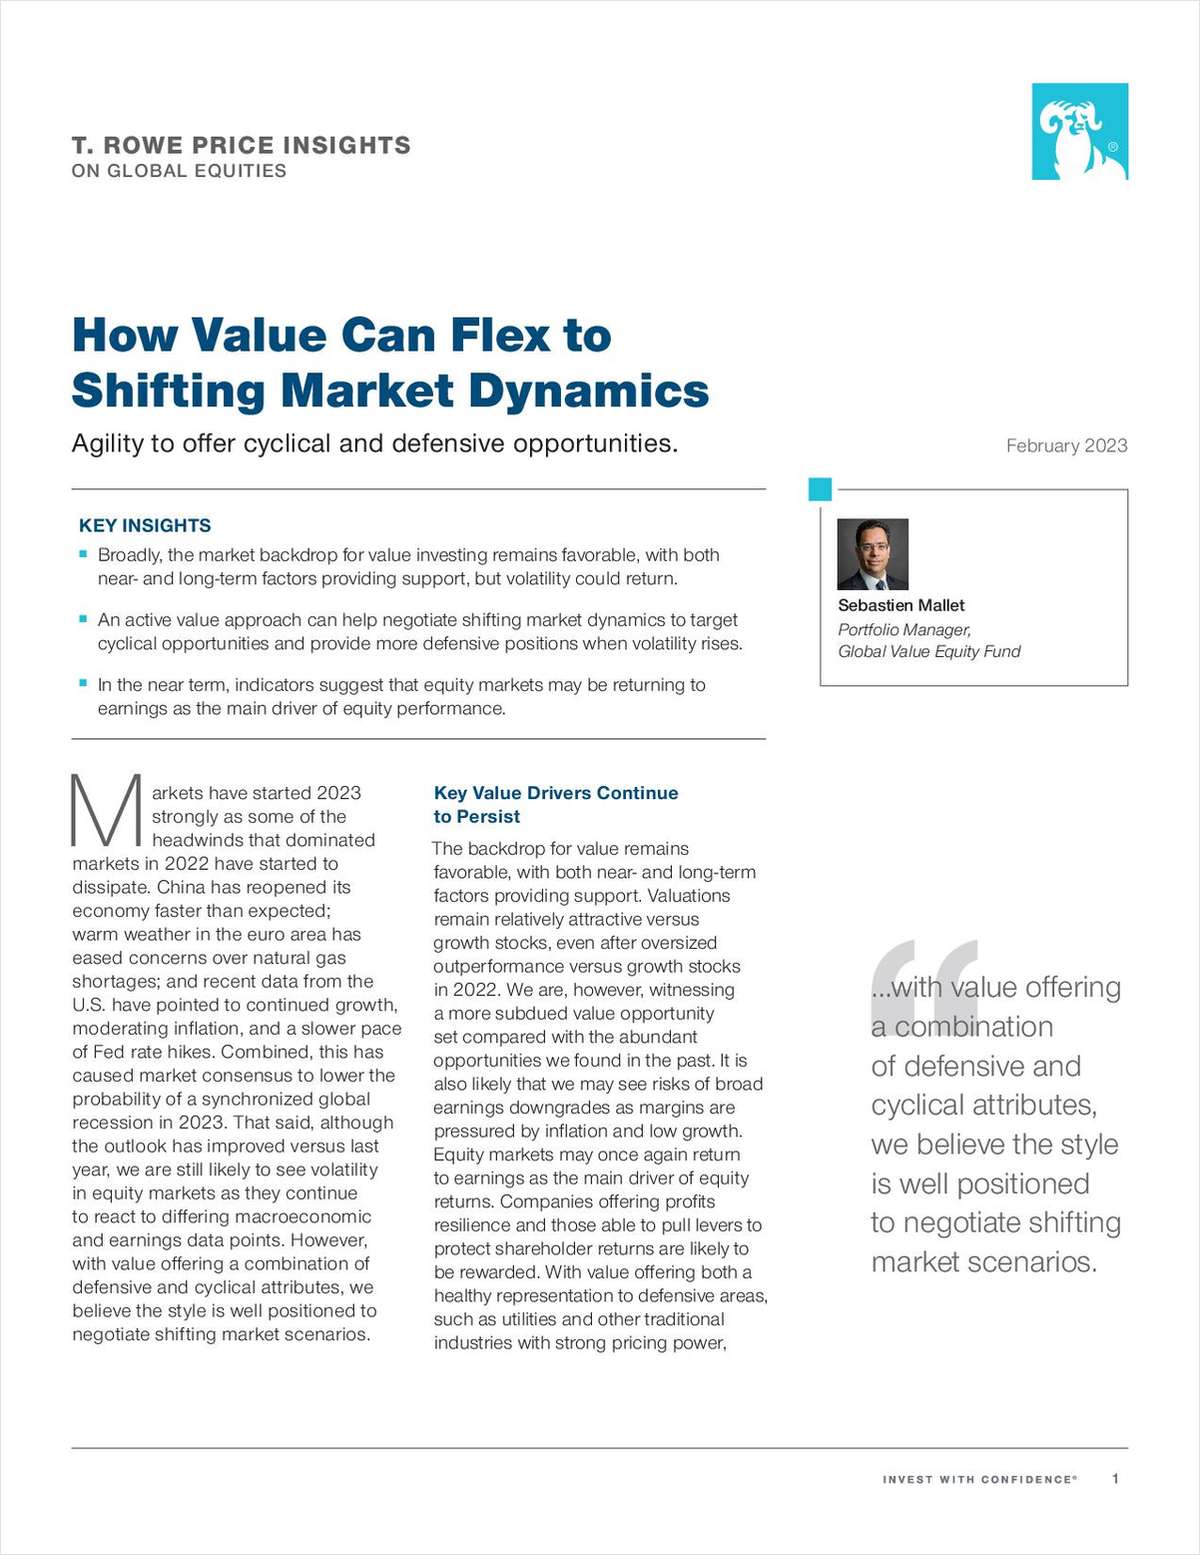 How Value Can Flex to Shifting Market Dynamics